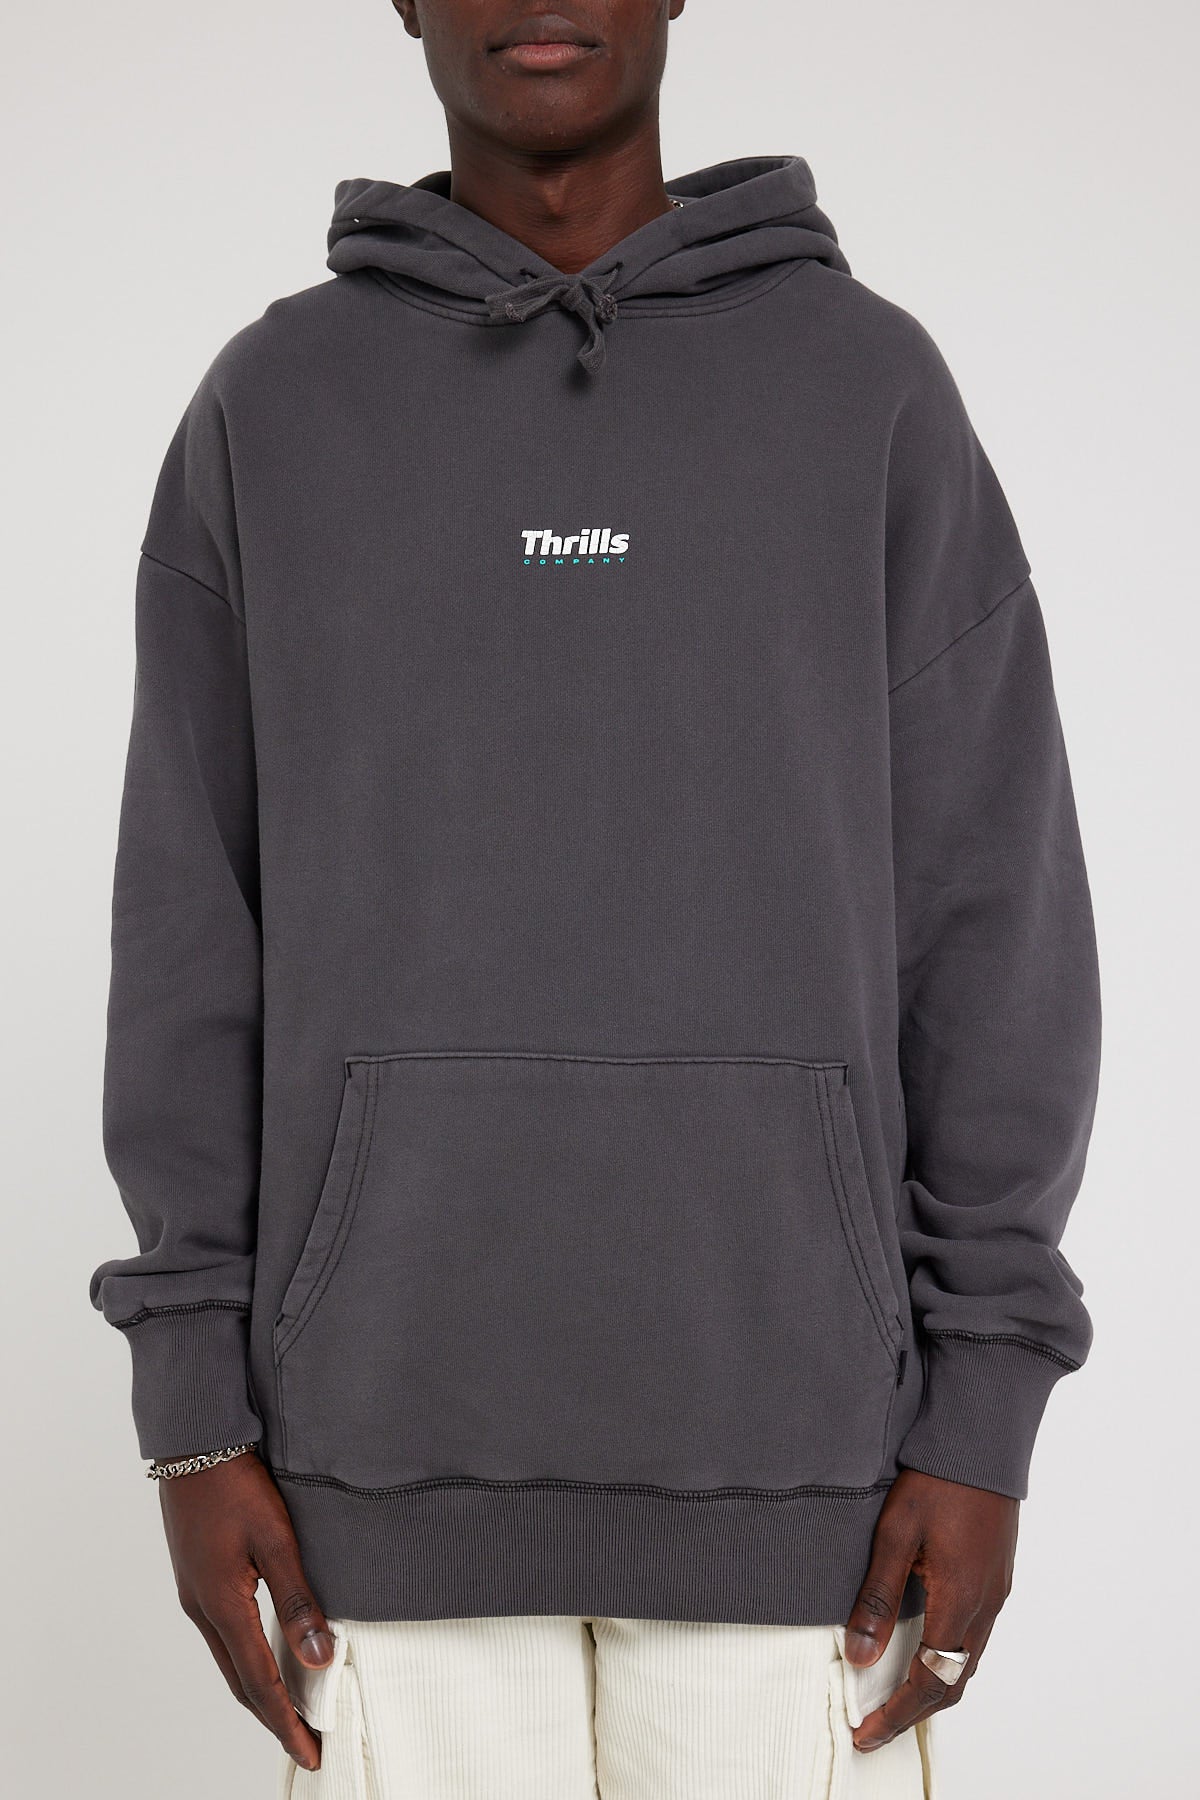 Thrills Paradox Slouch Pull On Hood Merch Black – Universal Store